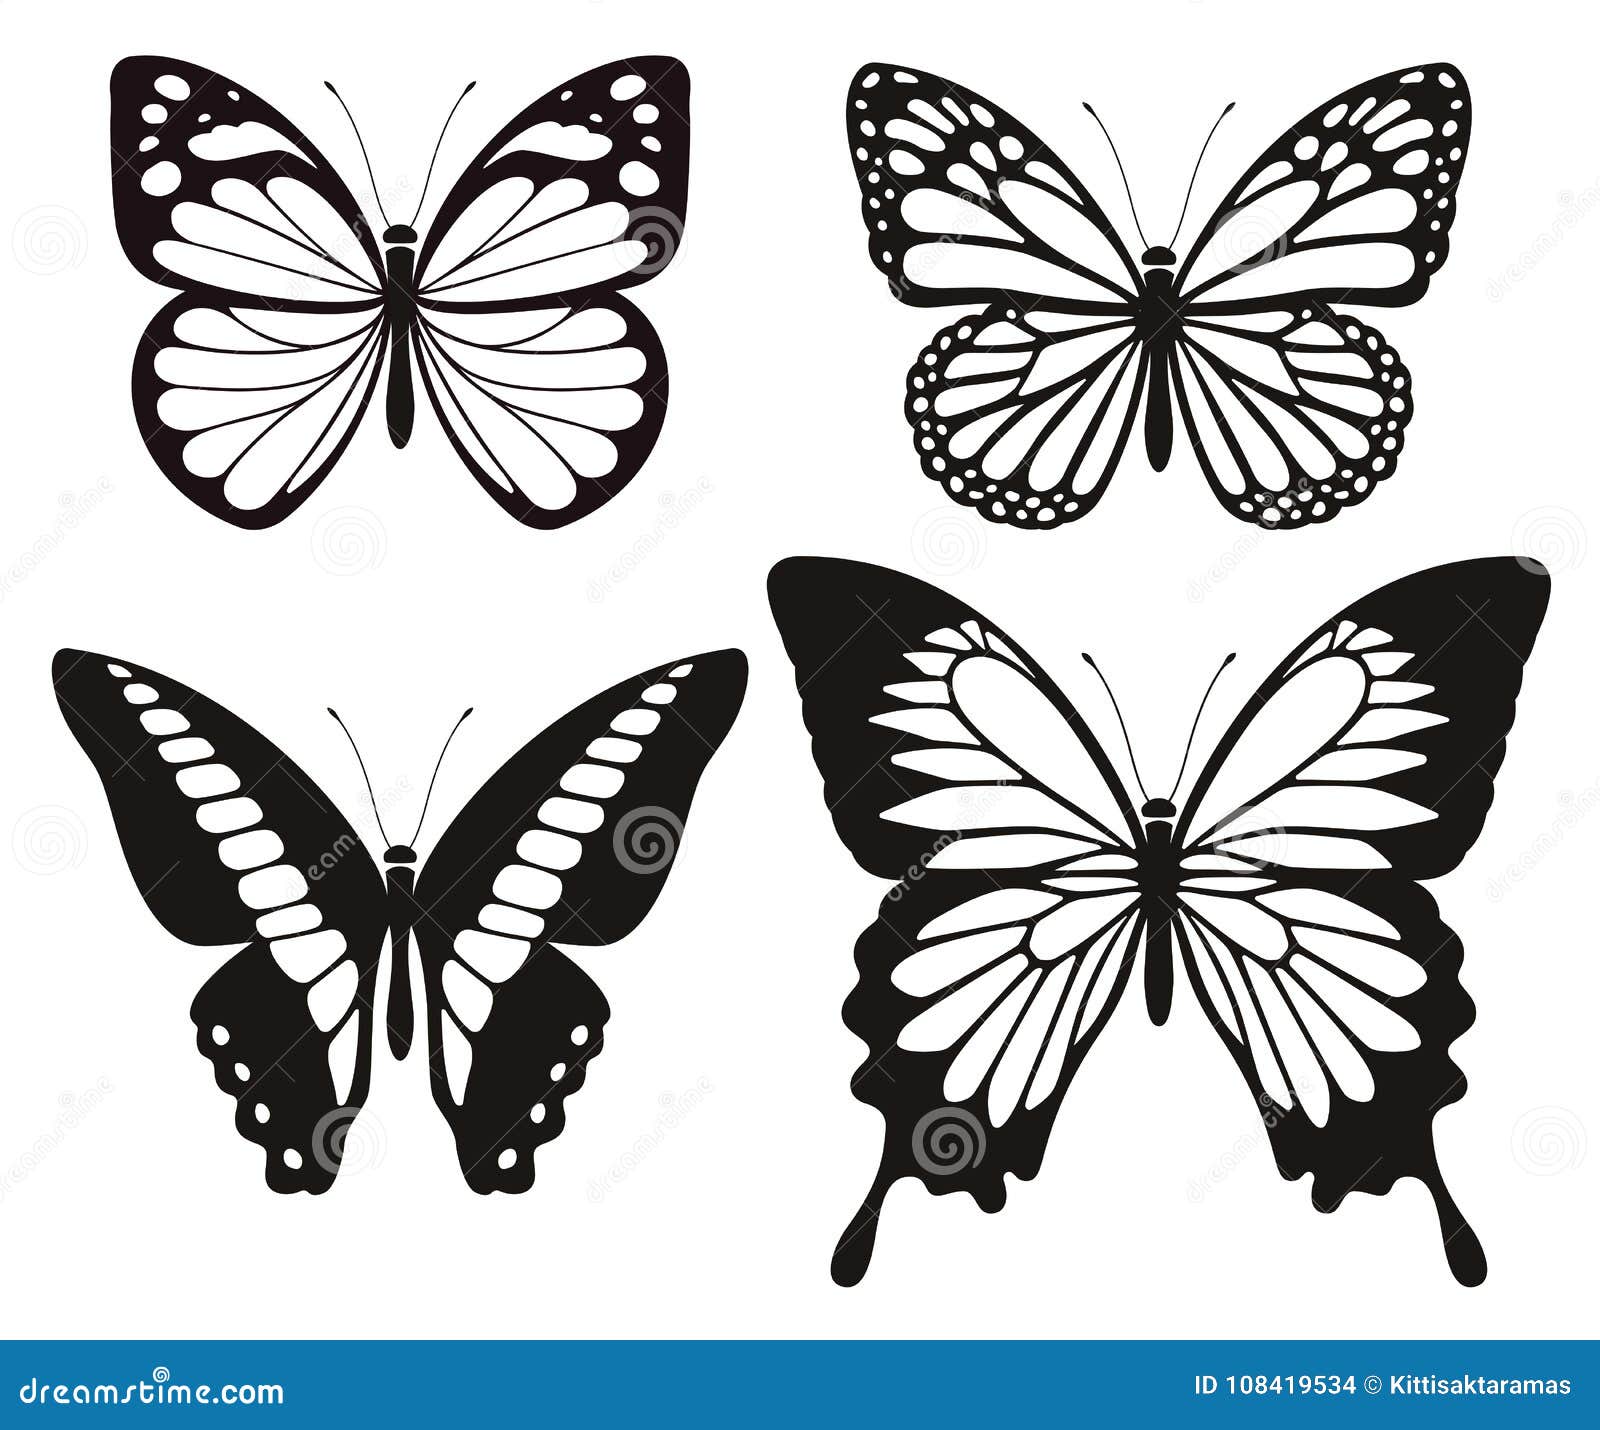 butterfly silhouette icons set.